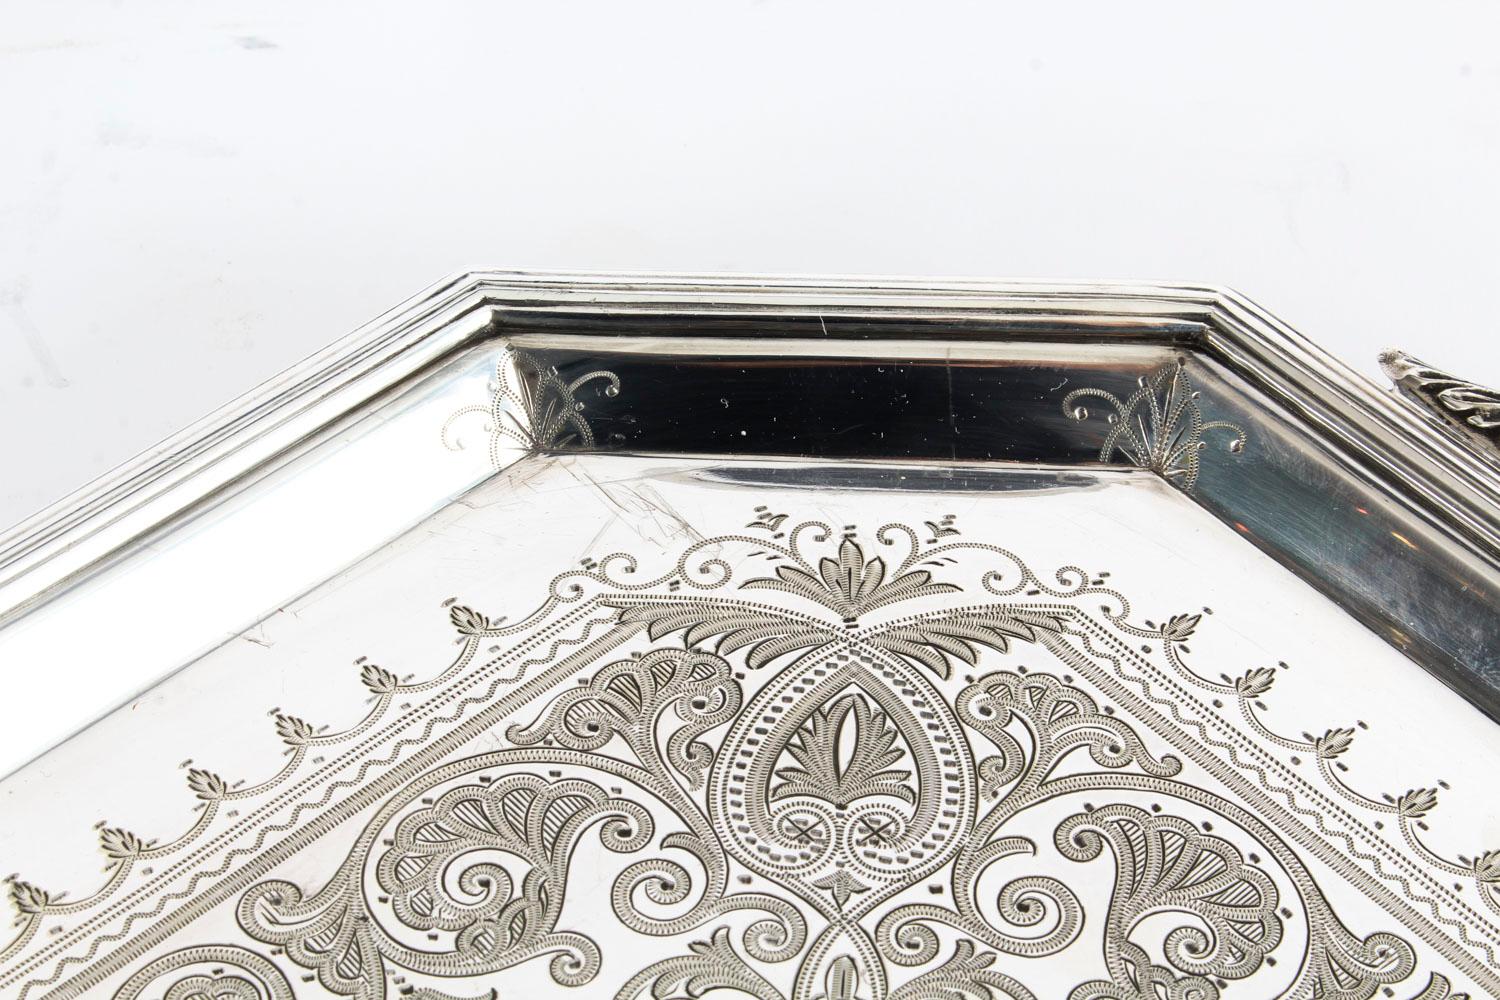 Late 19th Century Antique Victorian Silver Plated Service Tray Thomas Latham, 19th Century